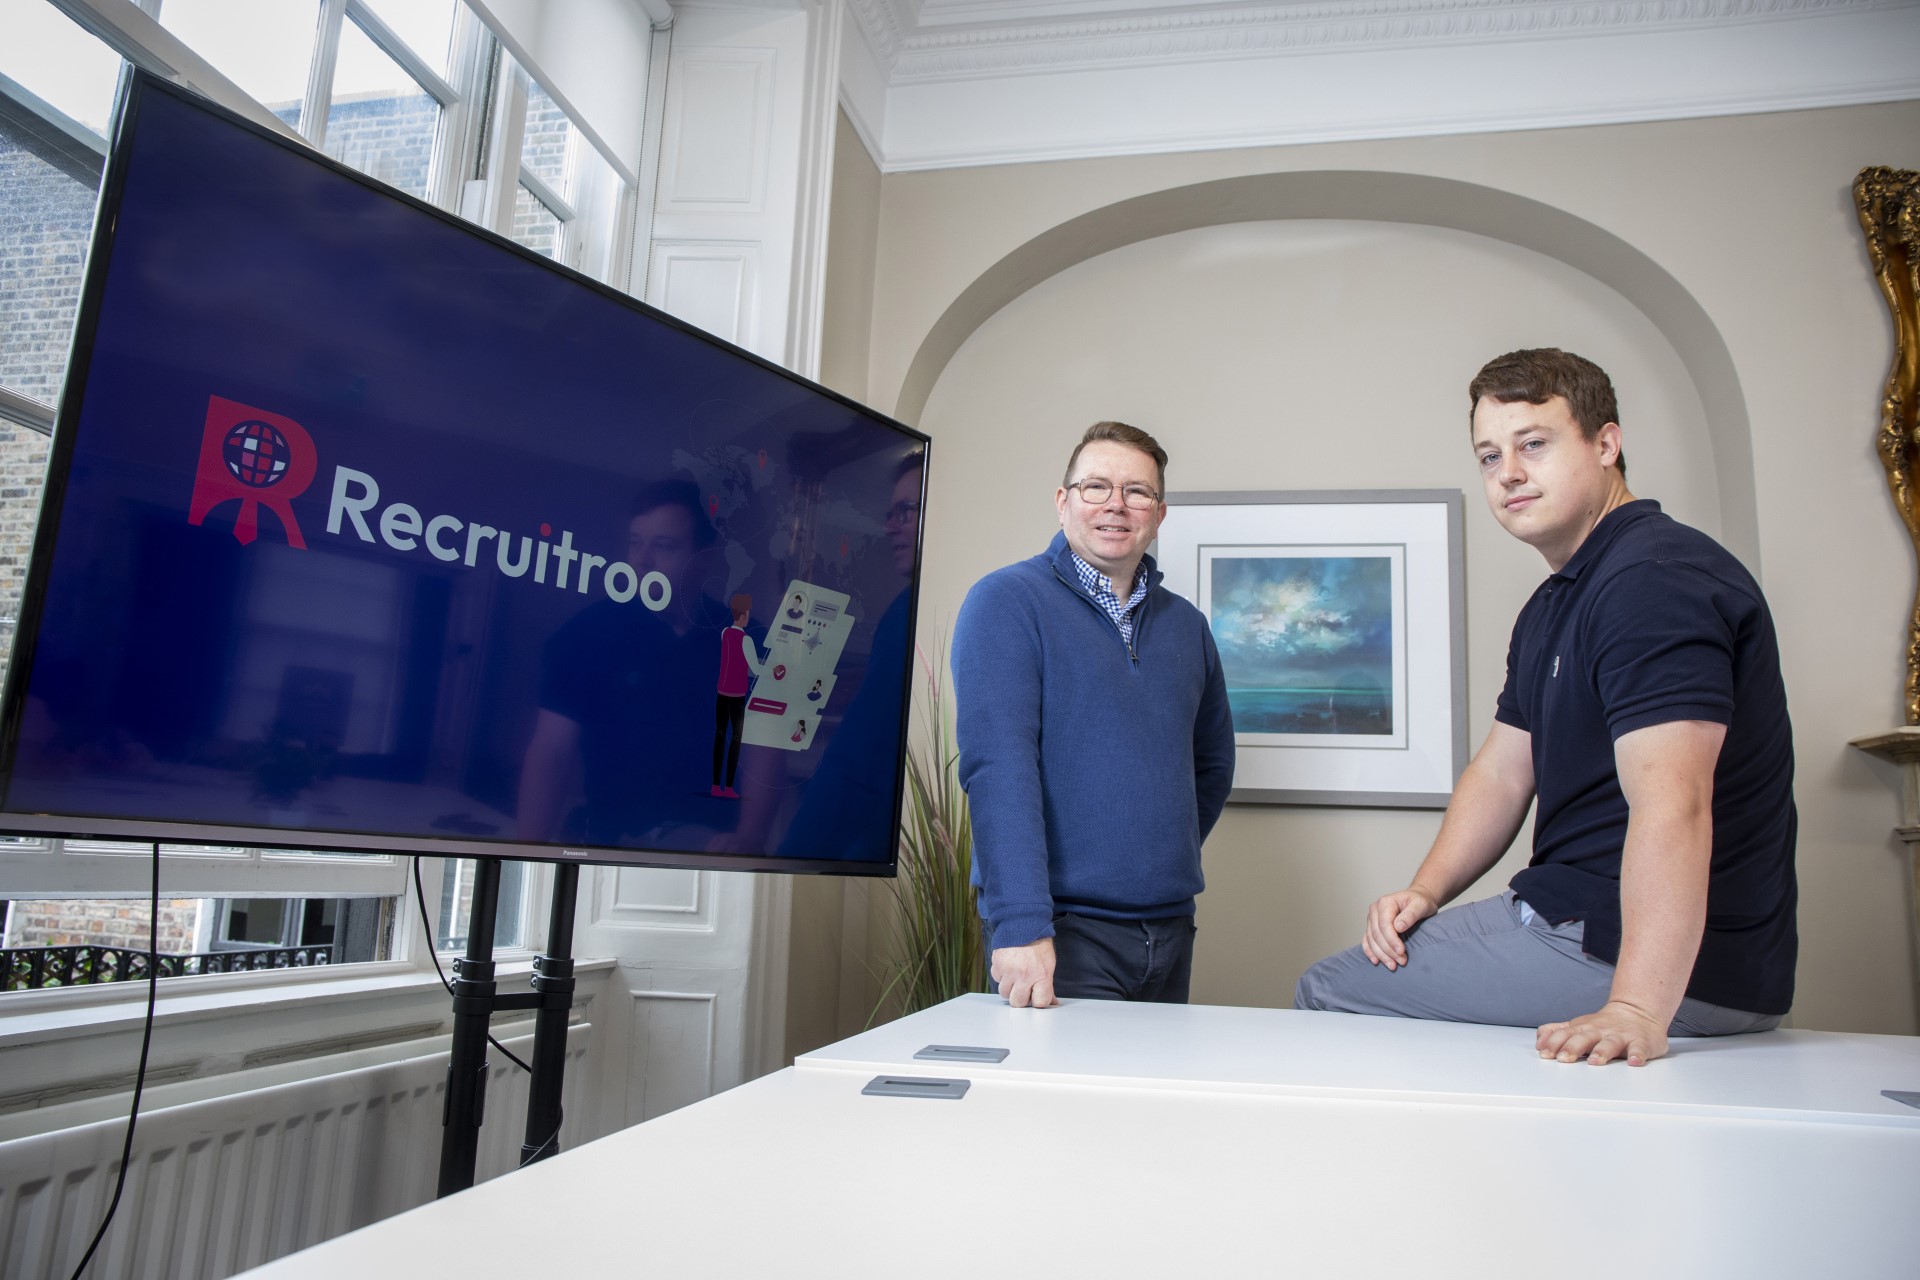 IGNITE Alumni - Recruitroo Secures €1M Investment to Solve Global Labour Shortages